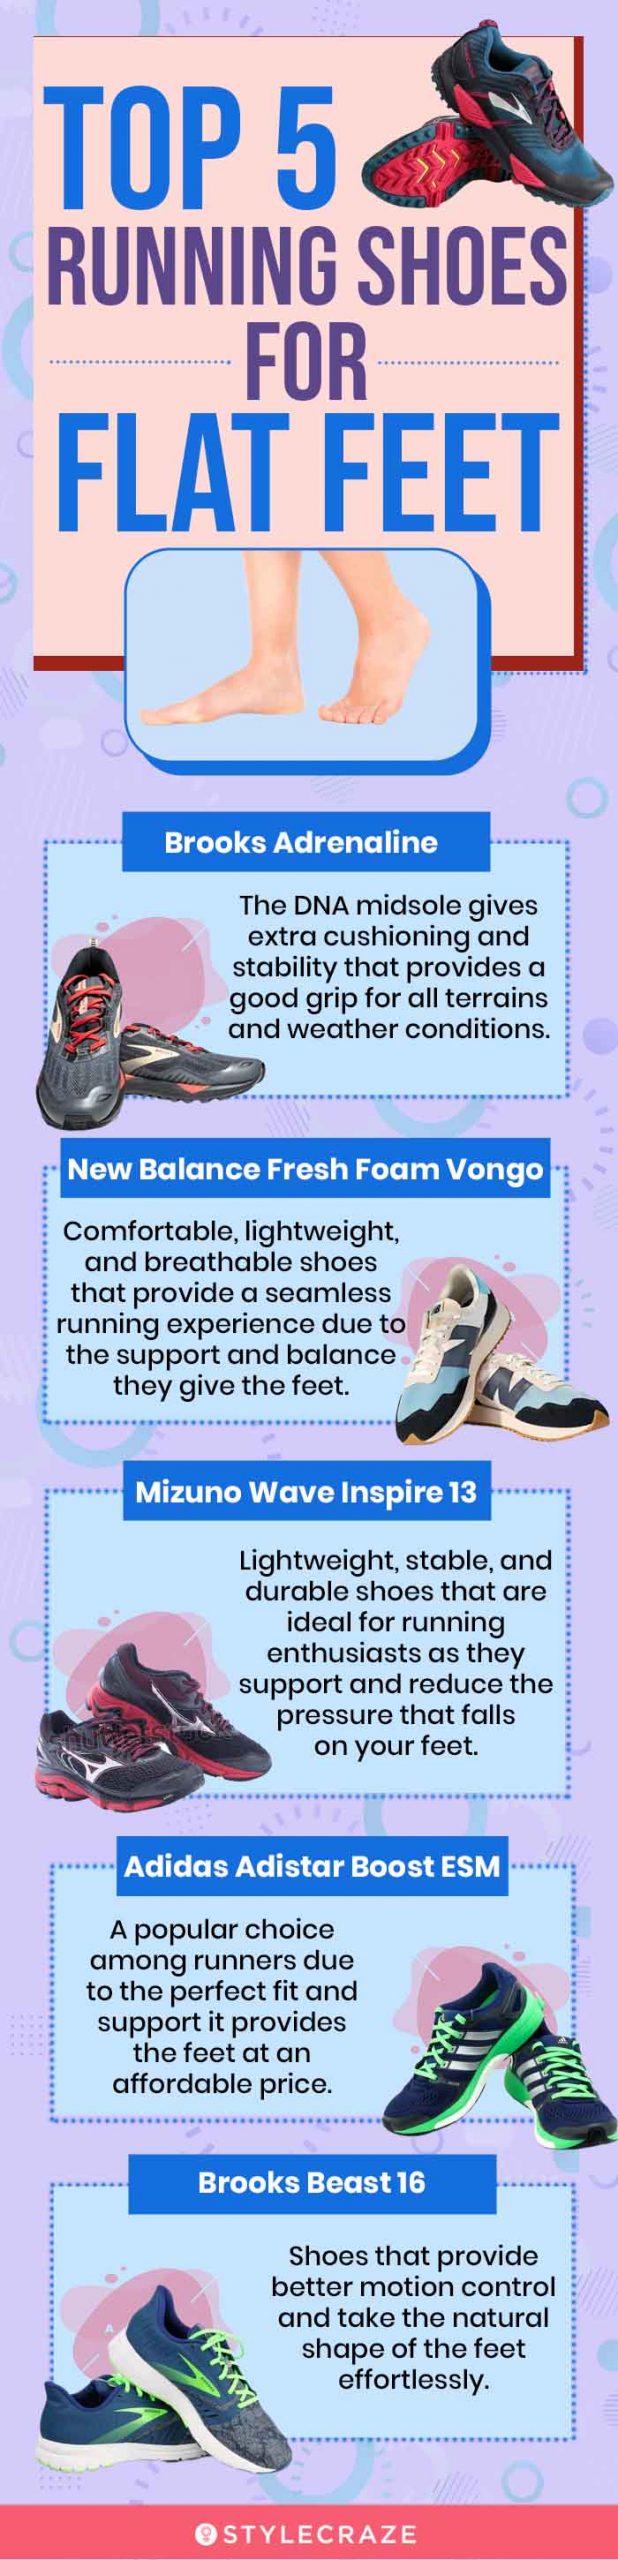 top 5 running shoes for flat feet (infographic)